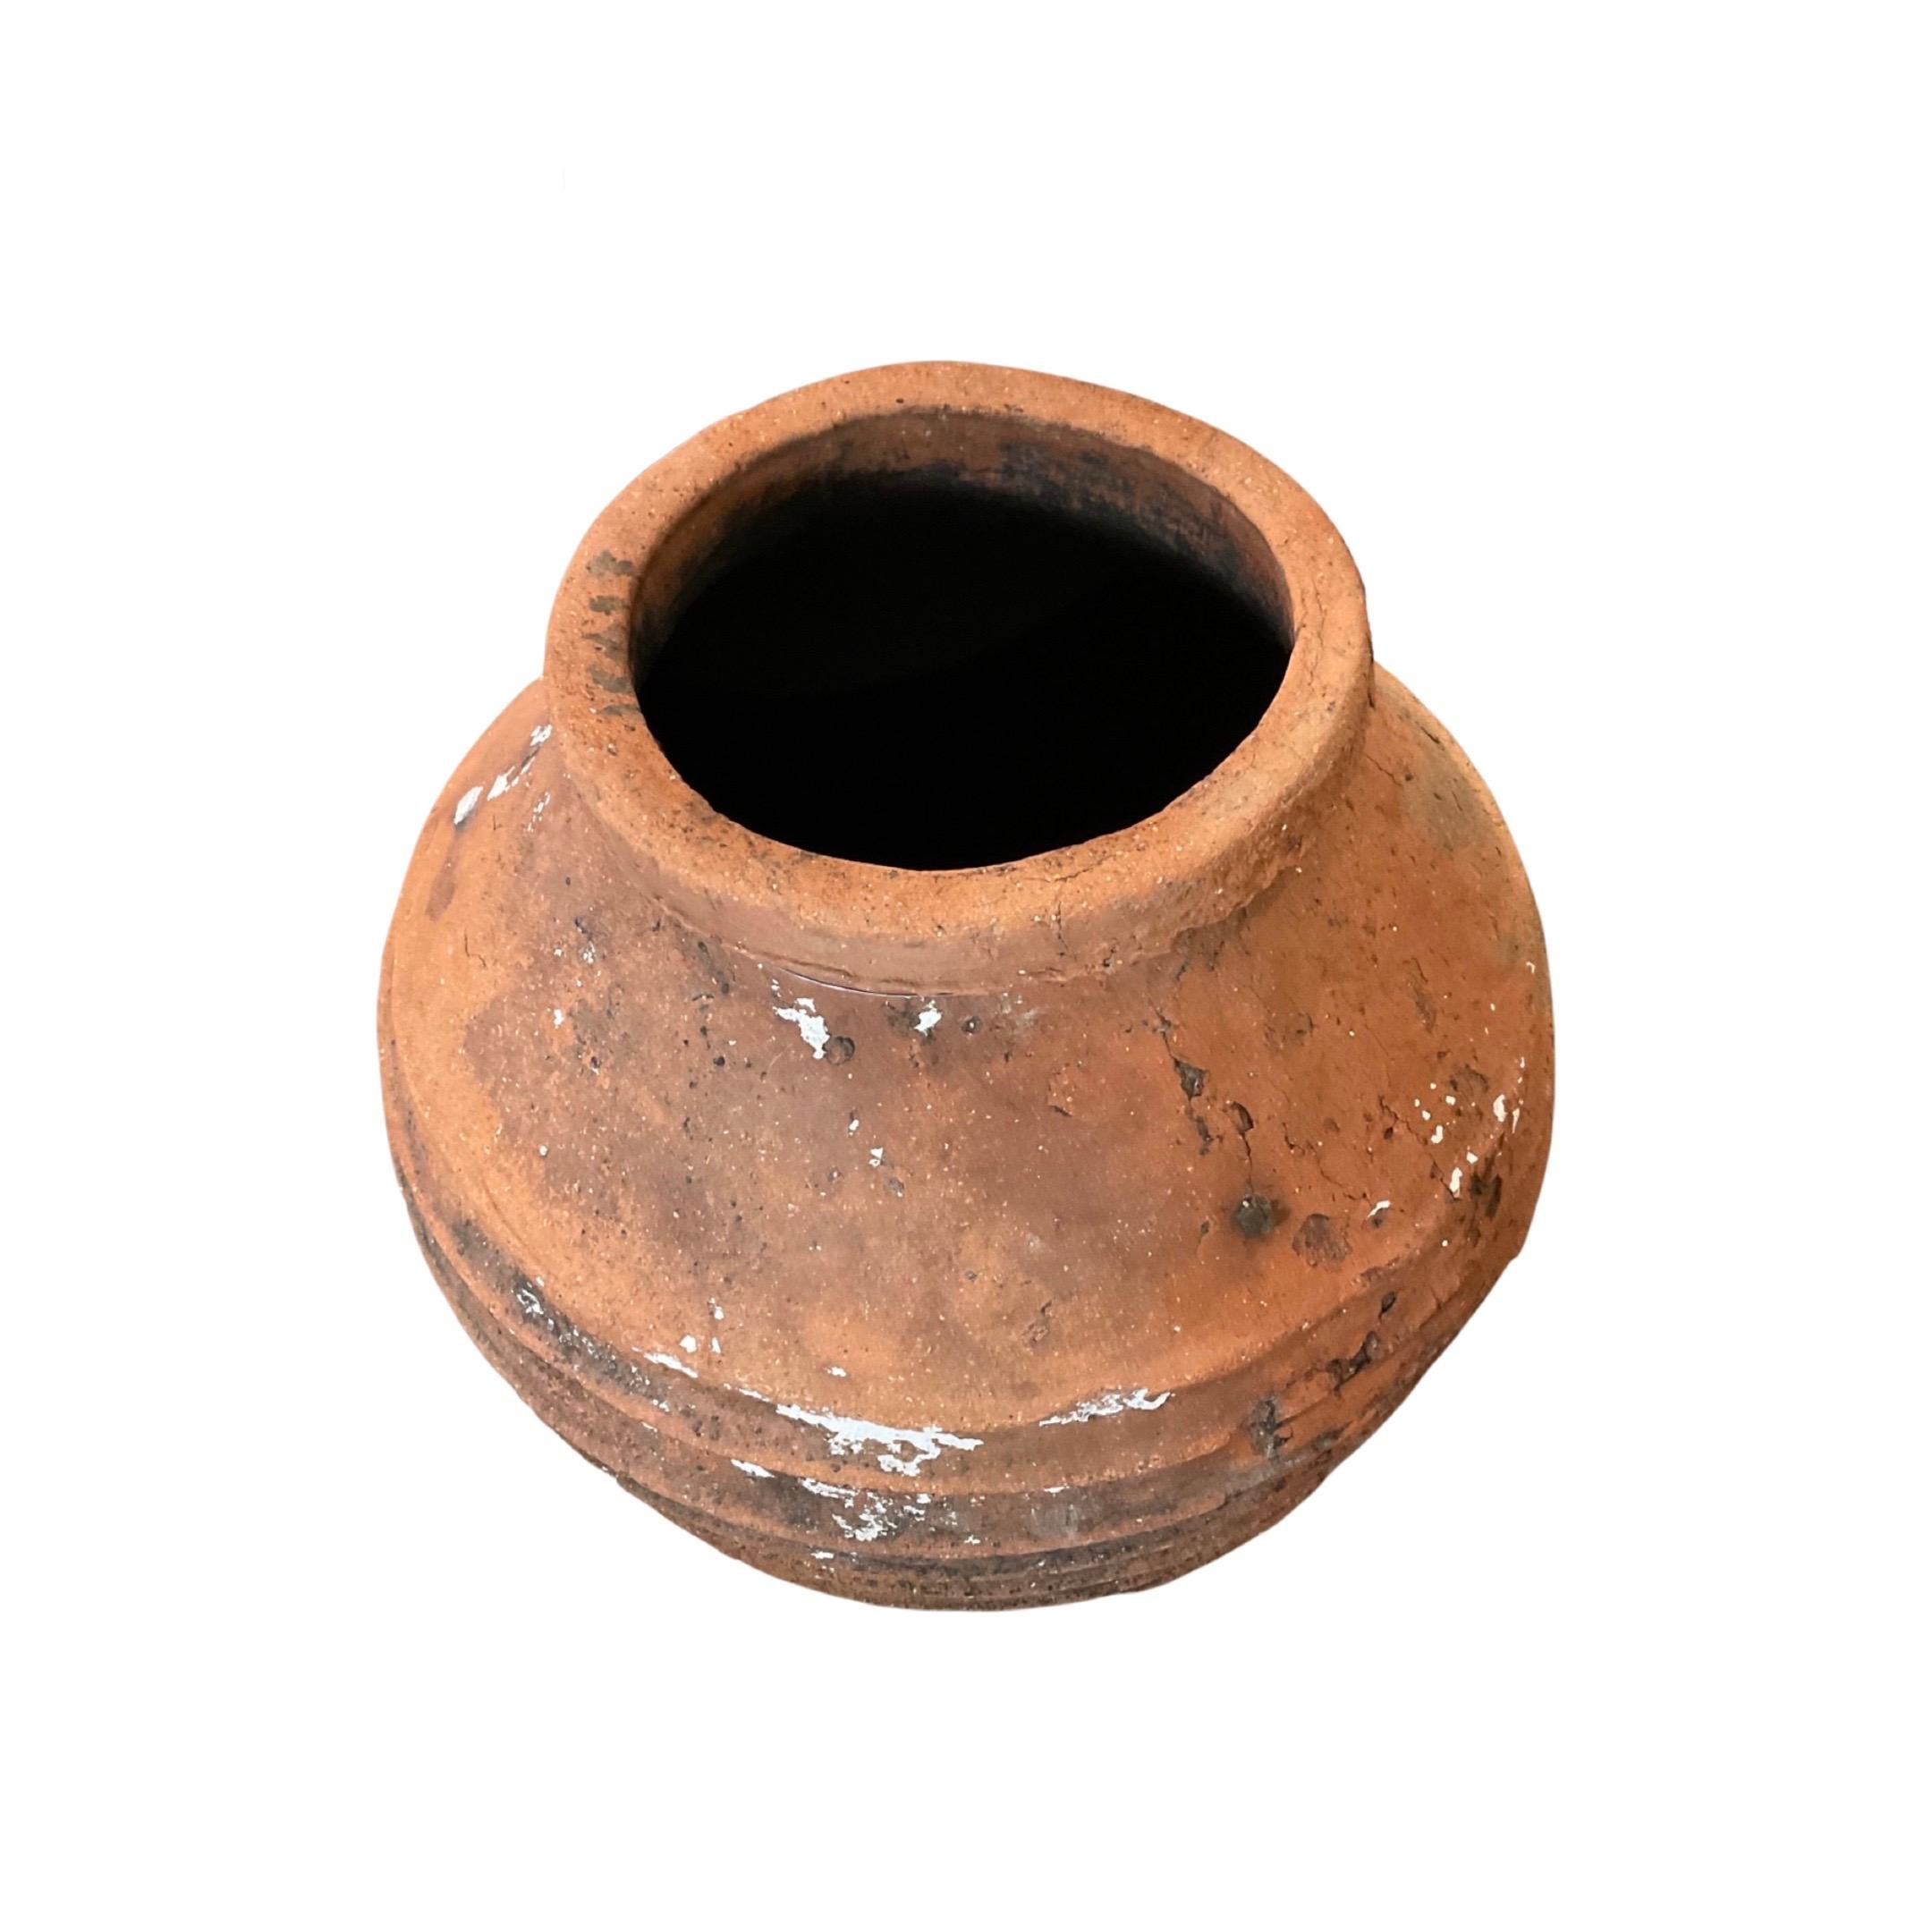 This traditional terracotta planter from Greece has been crafted from natural clay and fired at high temperatures, resulting in a durable, frost-resistant design that can withstand outdoor conditions for many years. Its 18th century origins make it